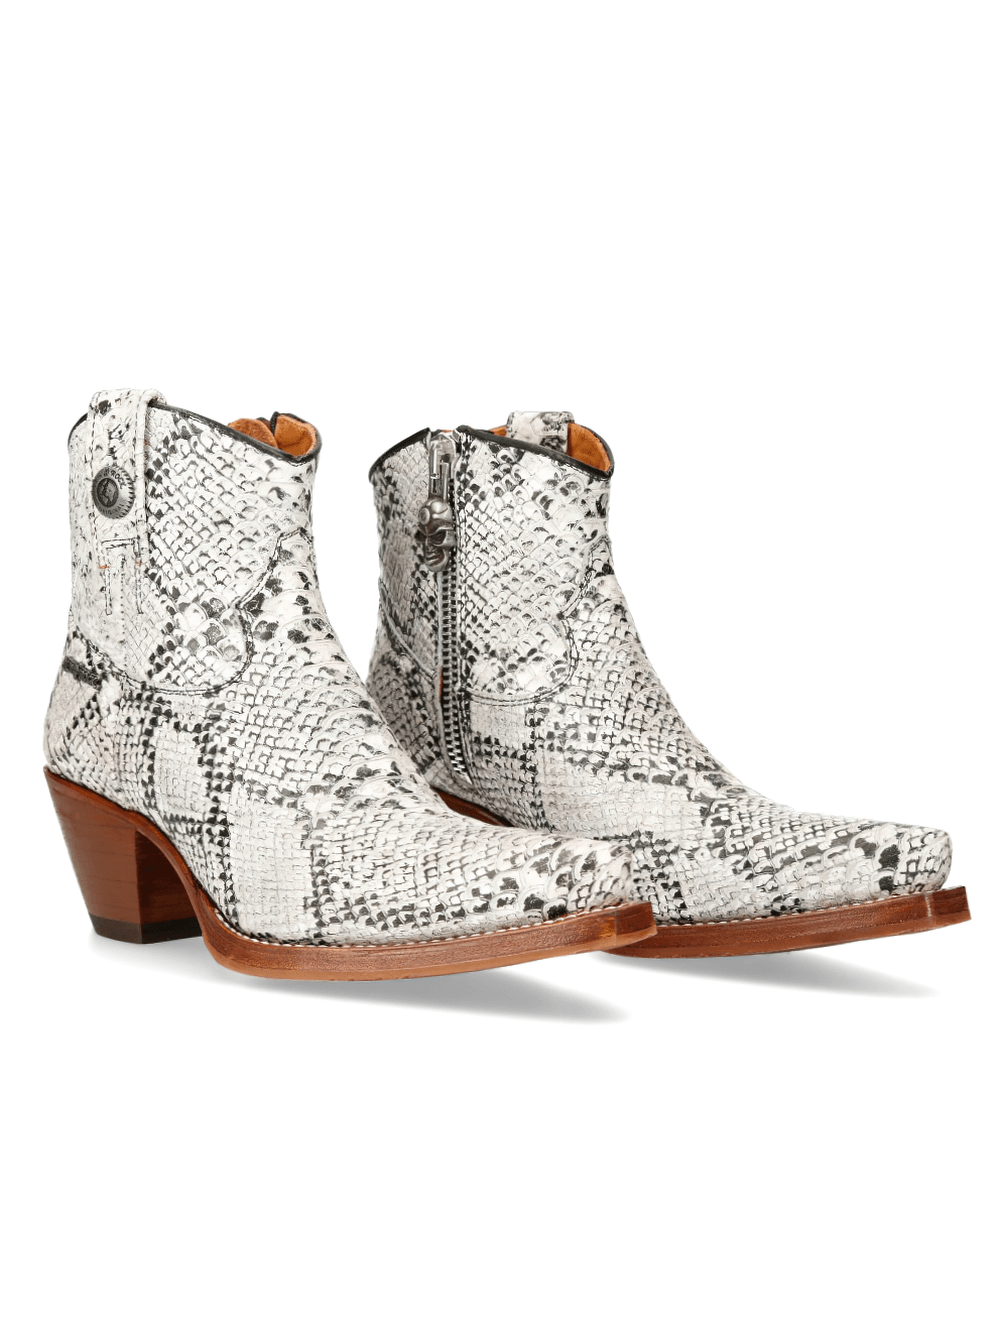 NEW ROCK White Snake Print Ankle Boots with Zipper